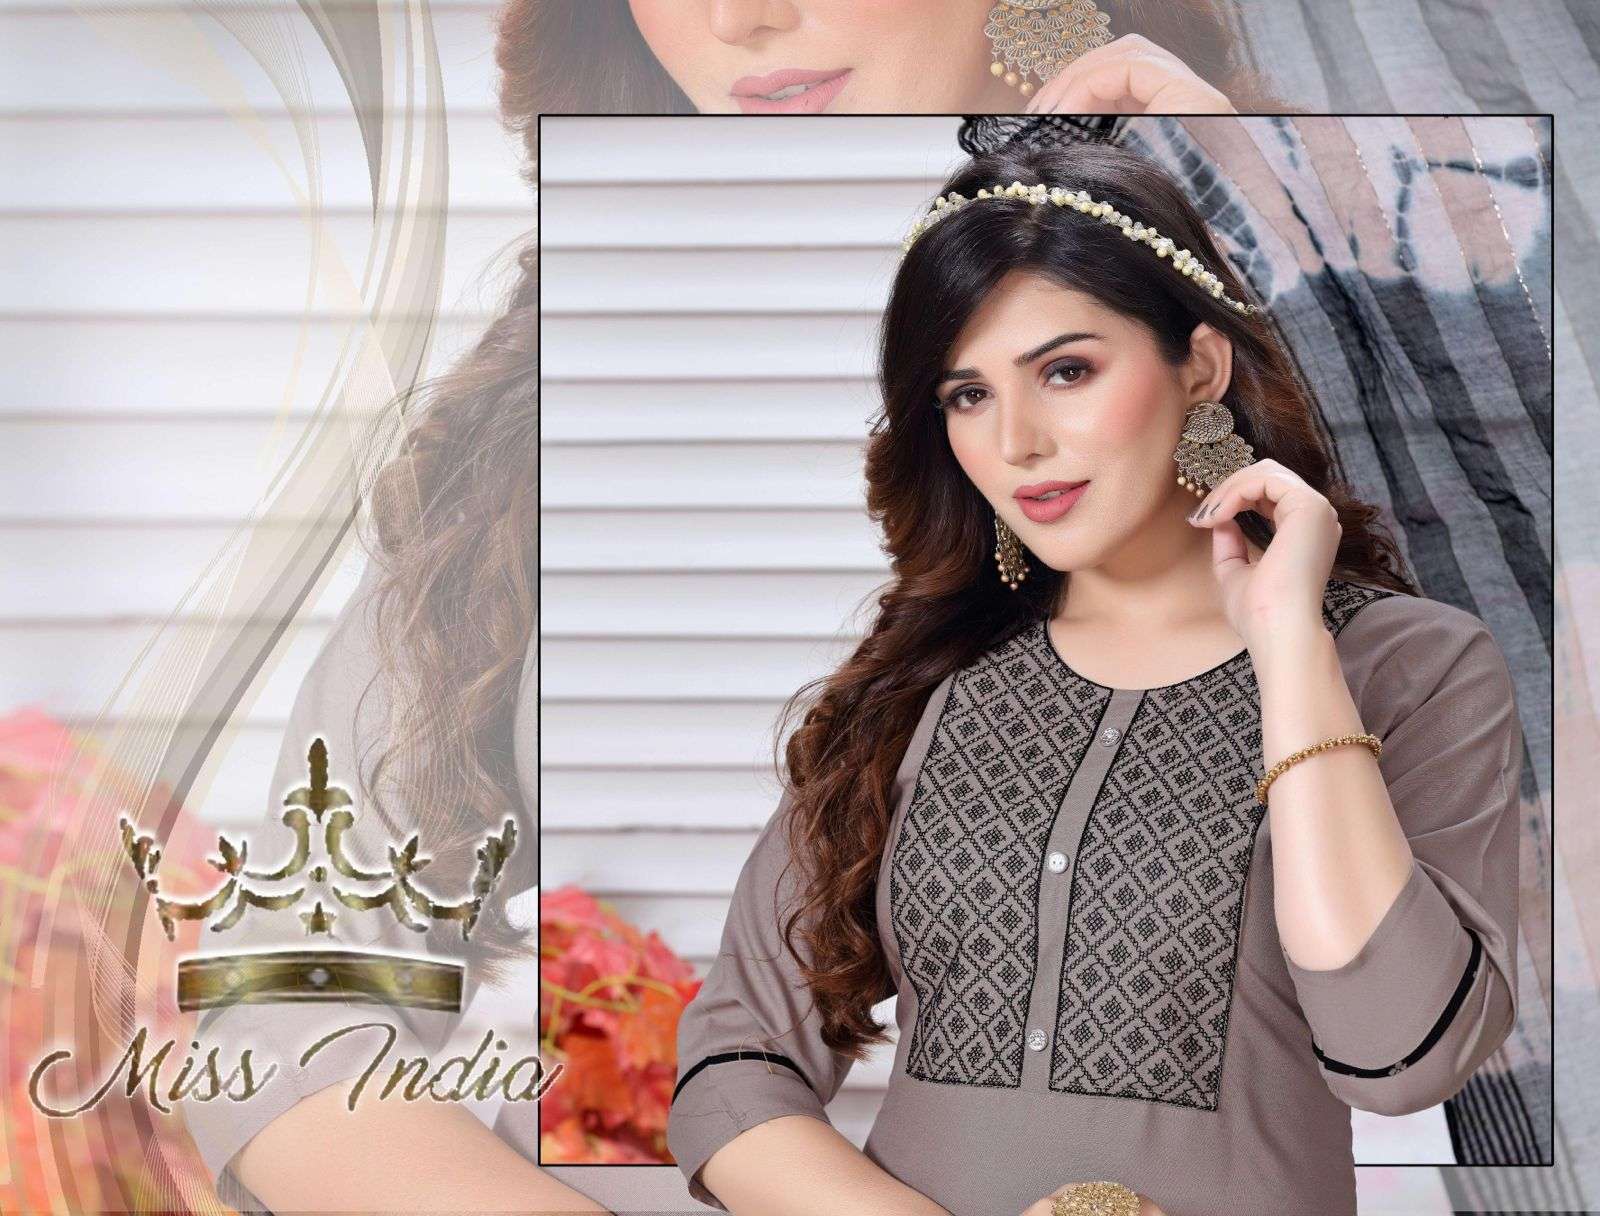 beauty queen miss india 9001-9006 14 Kg Heavy Rayon suit